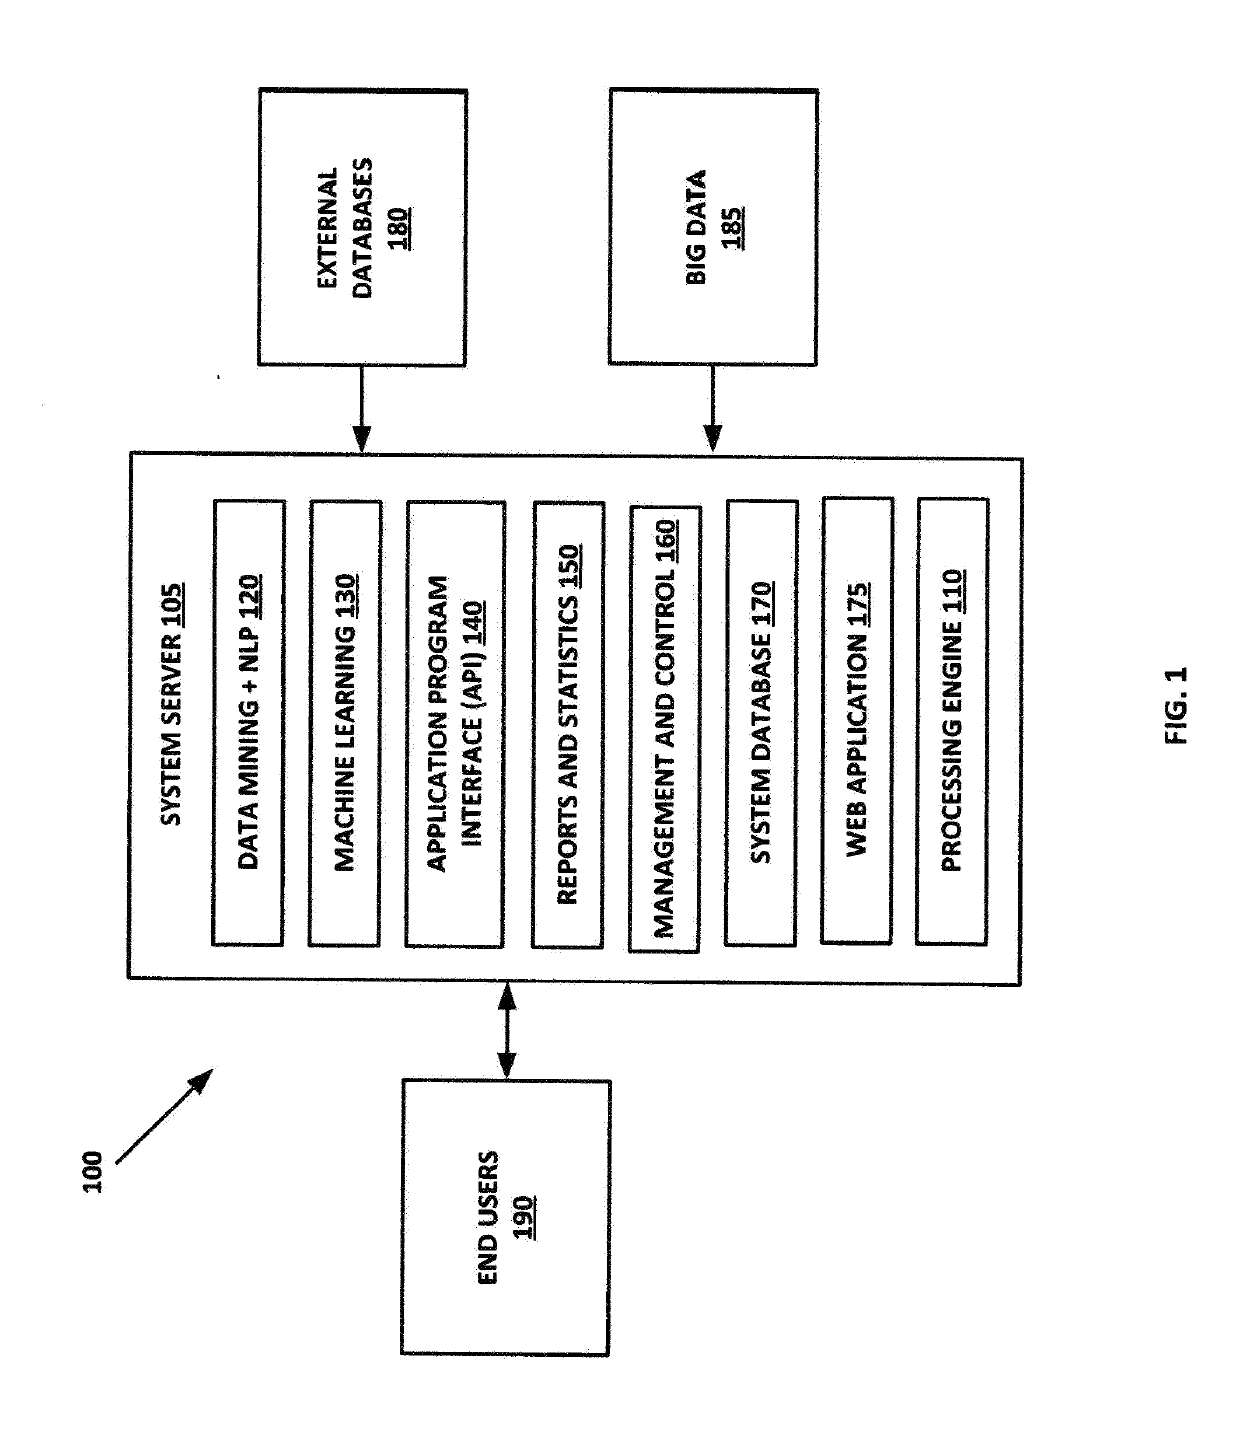 Automated method and system for screening and prevention of unnecessary medical procedures